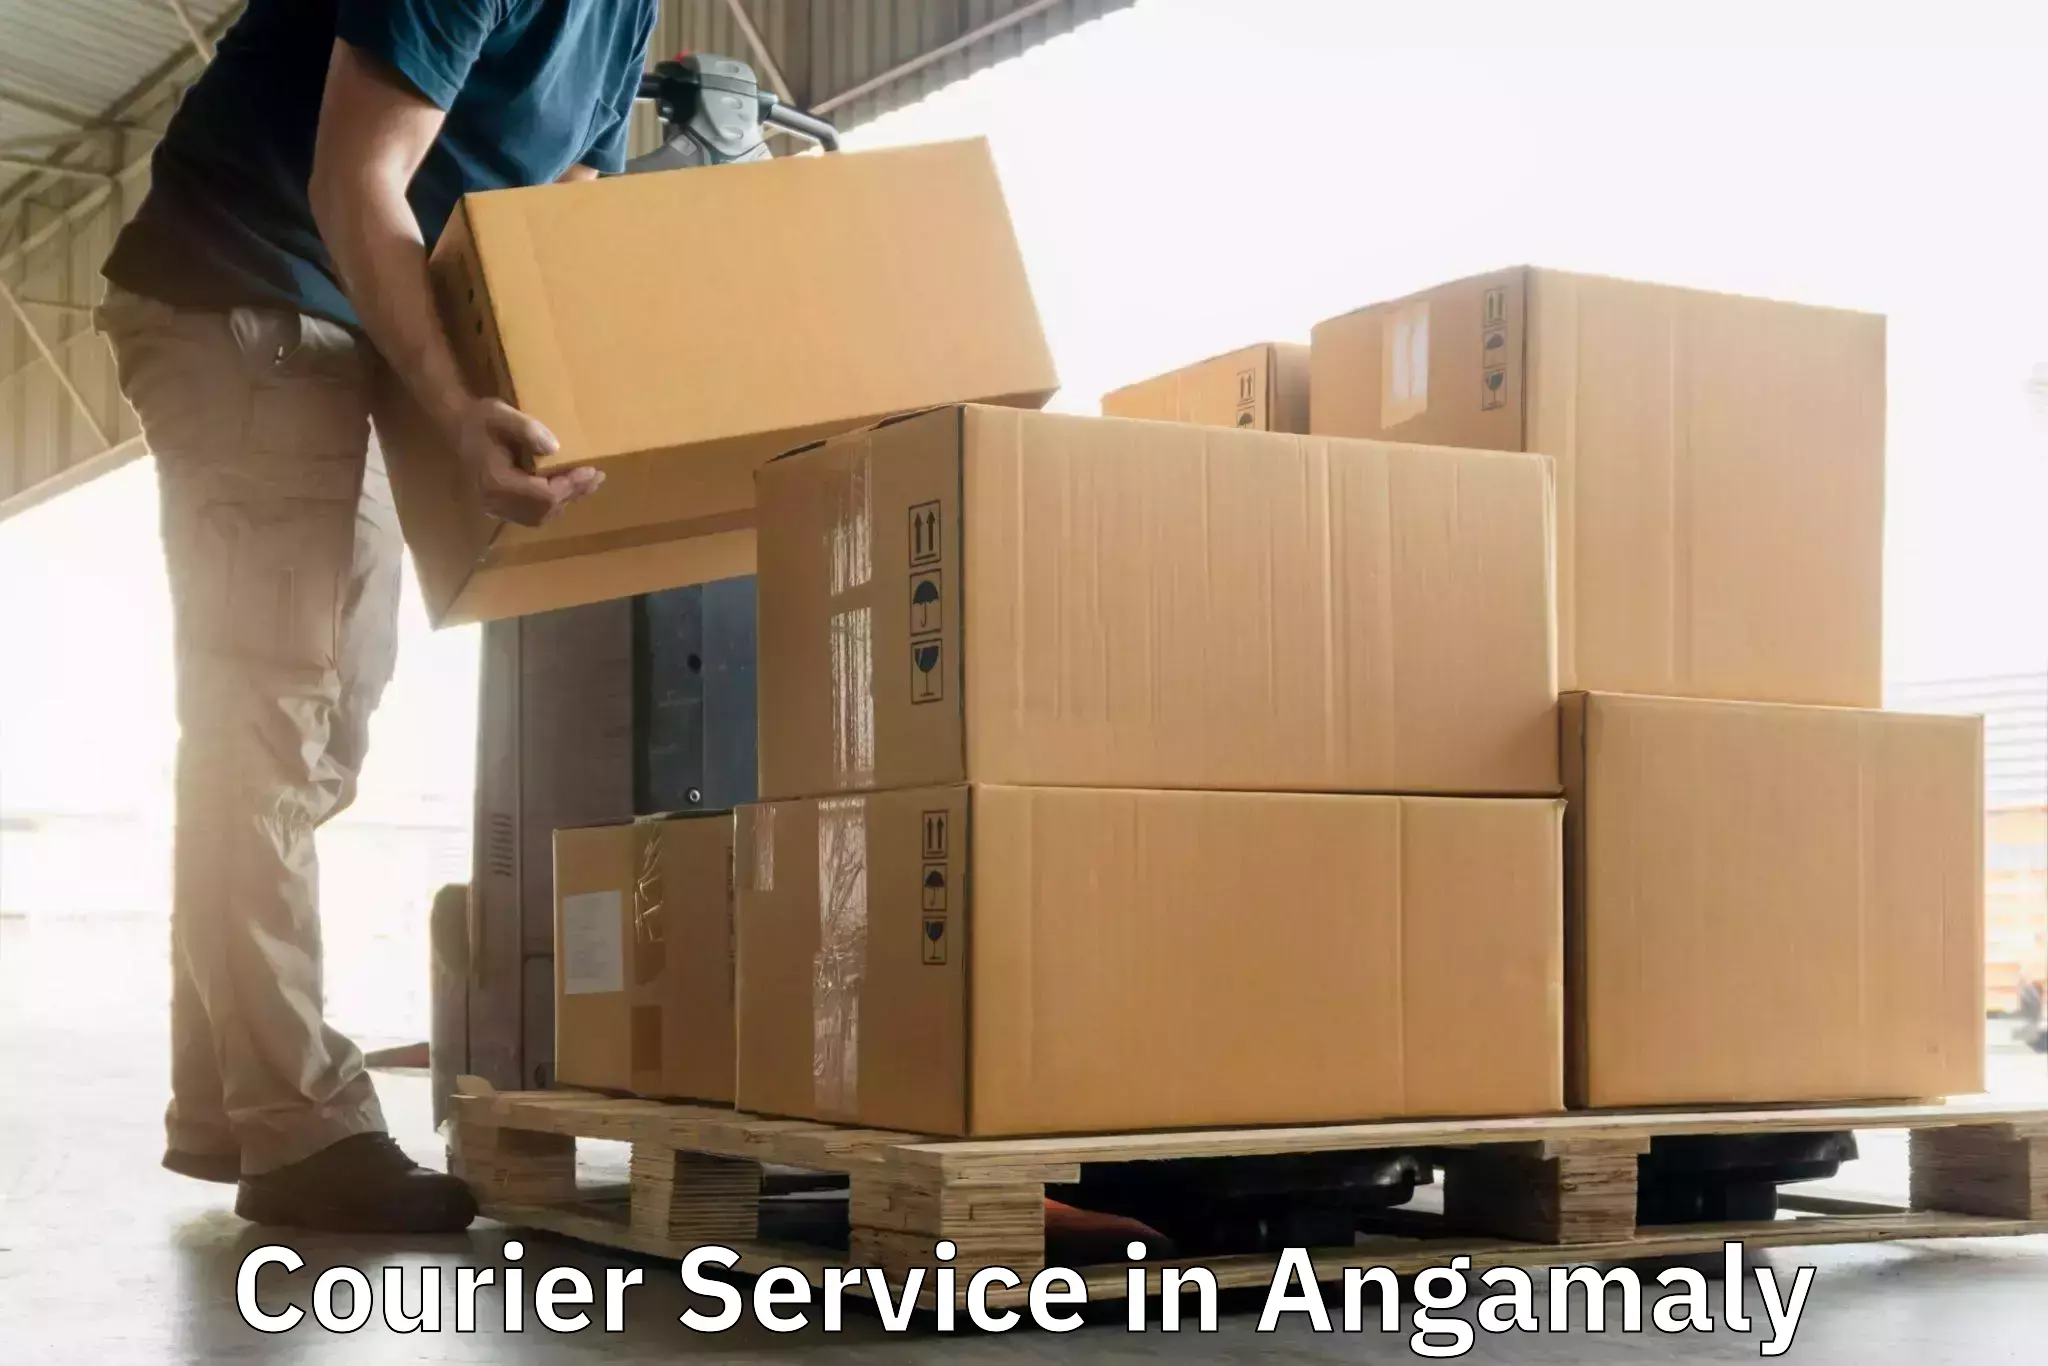 Digital shipping tools in Angamaly